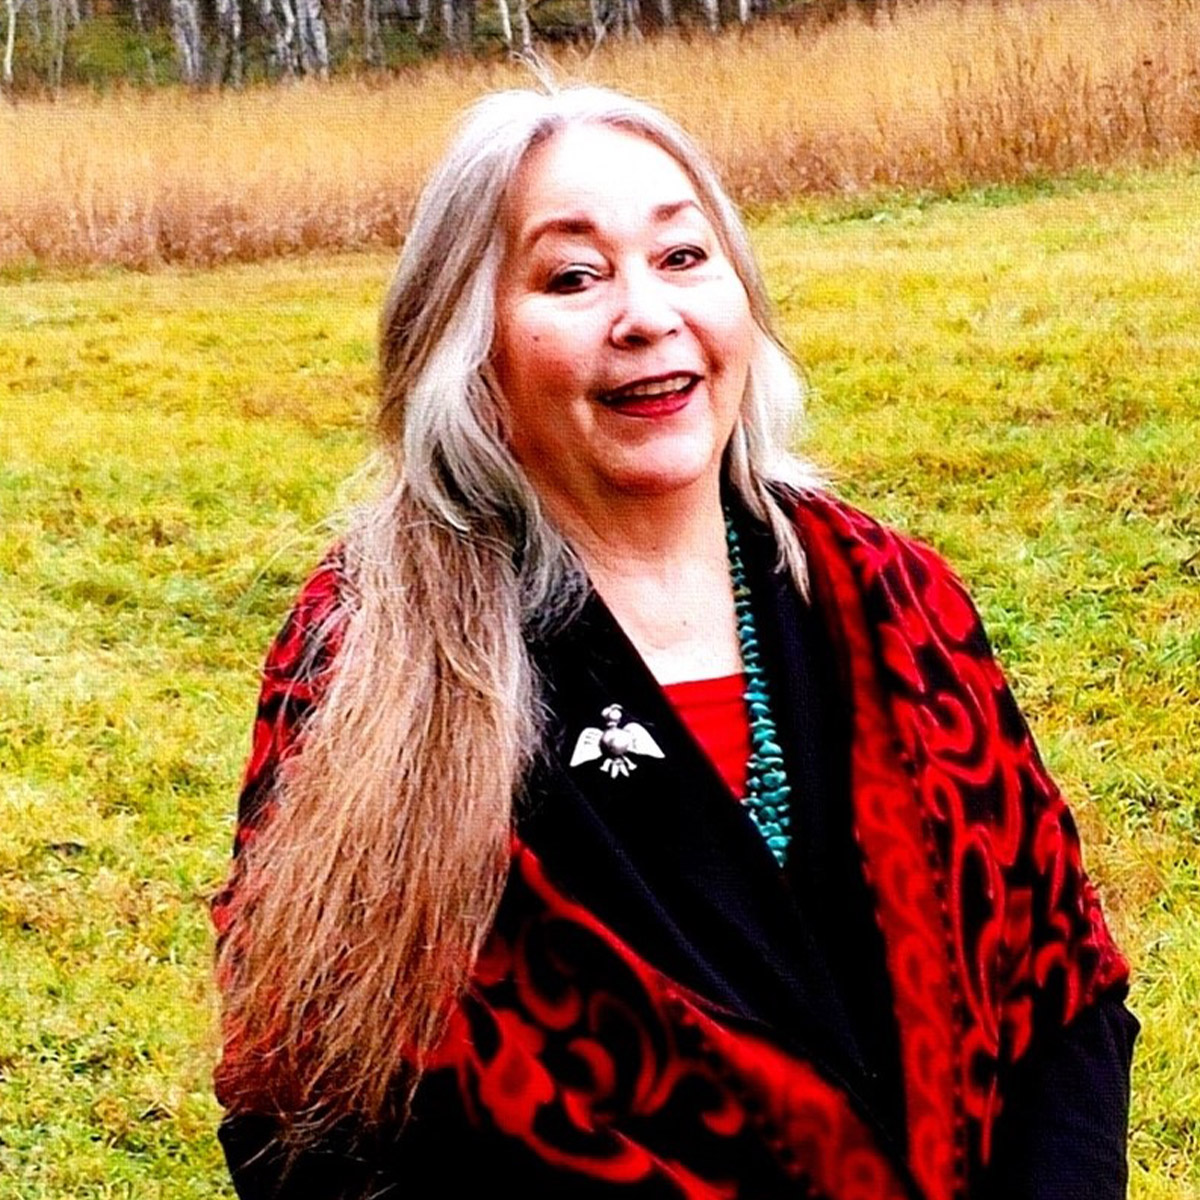 Francesca Mason Boring color portrait. Francesca is a bicultural Western Shoshone woman enrolled with the Shoshone Paiute Tribes. She is smiling, posed outside with grass and dried plants behind her. She is wearing a bright-red printed knit coat, a silver pin shaped liked a bird, and has long silver hair with brown highlights.